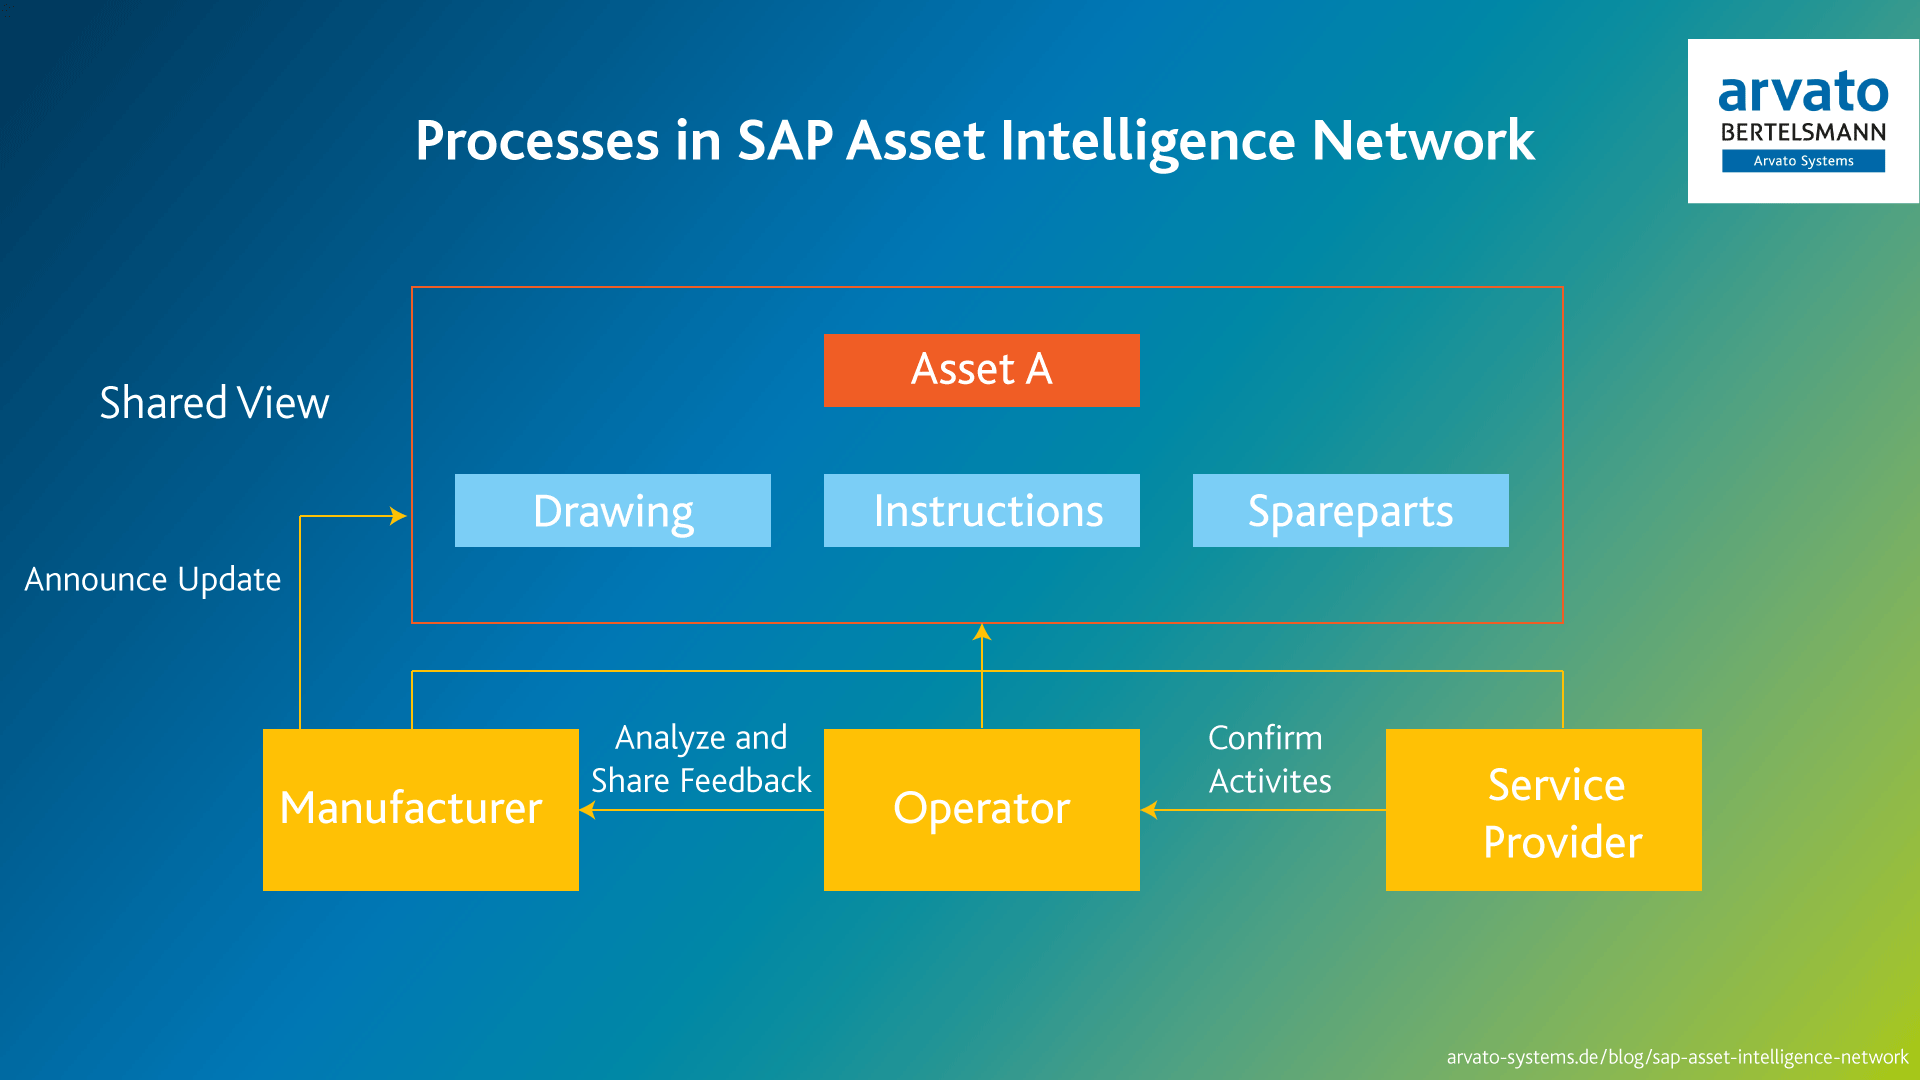 Processes in SAP AIN - Blog Arvato Systems